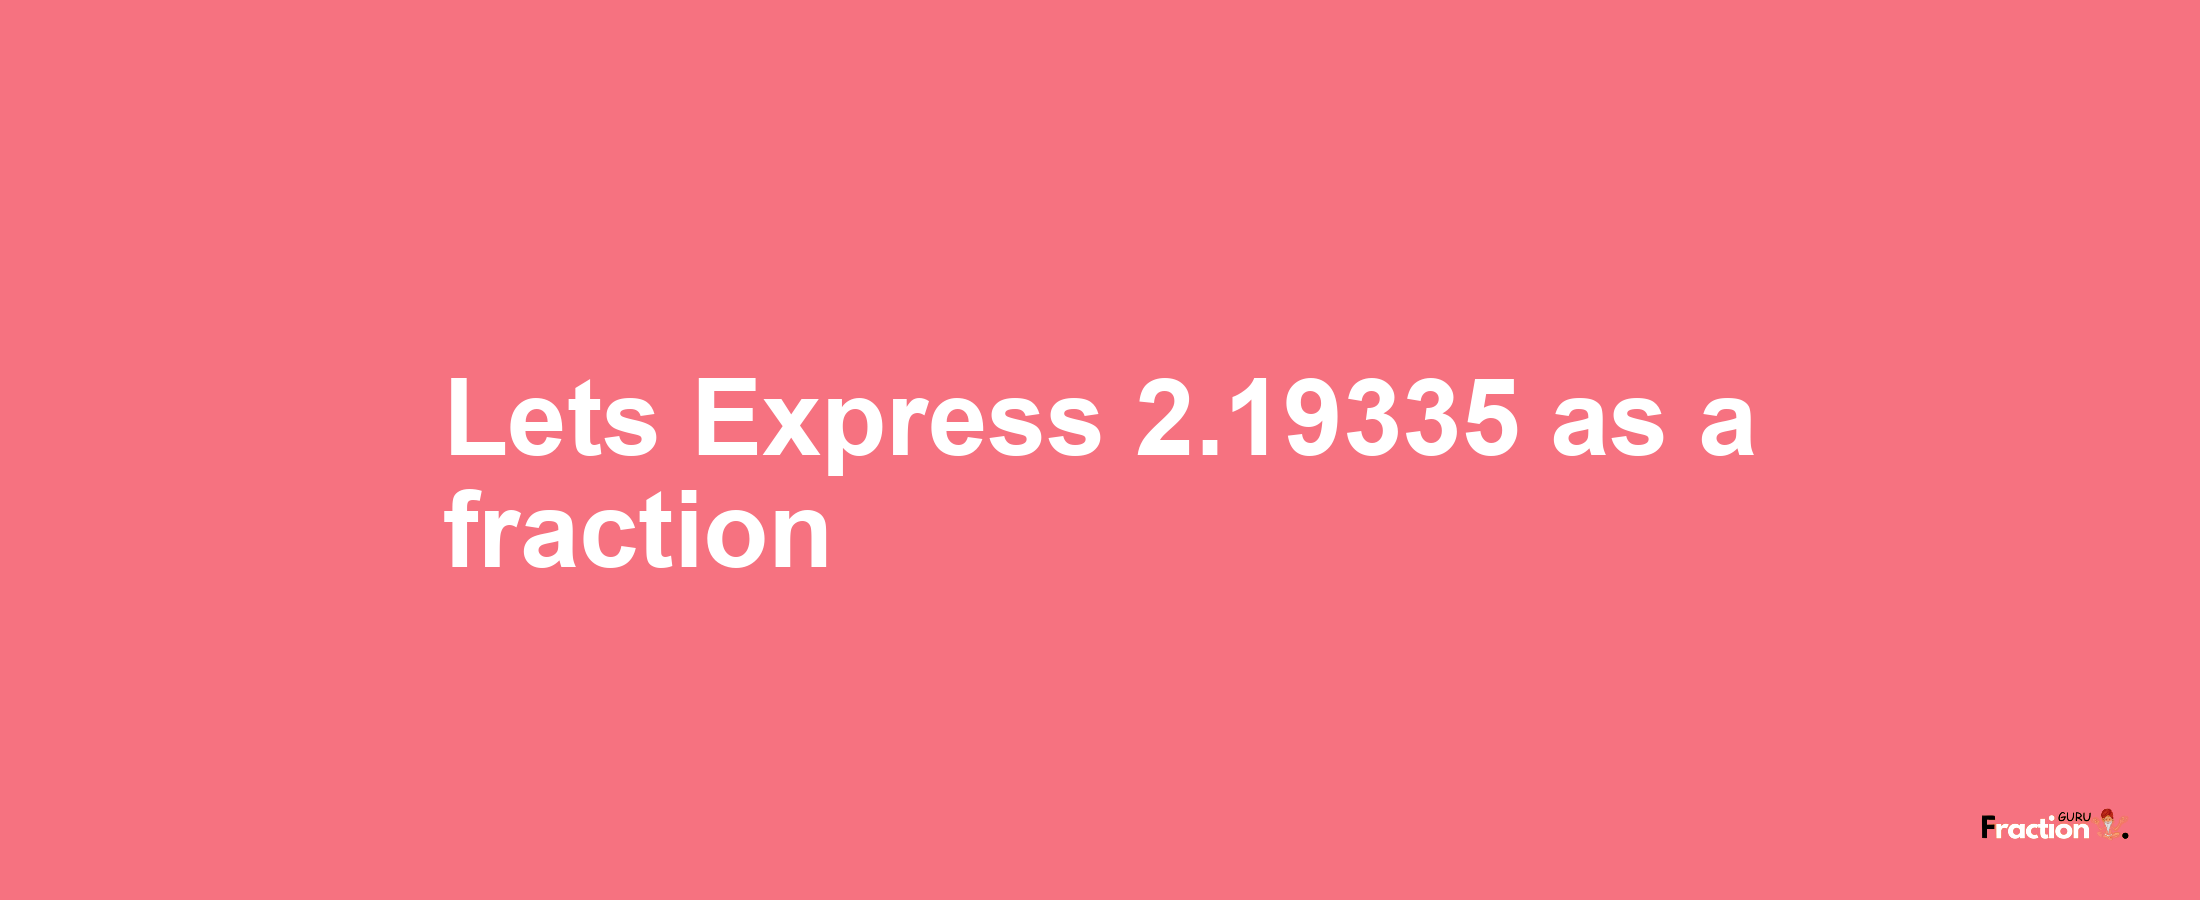 Lets Express 2.19335 as afraction